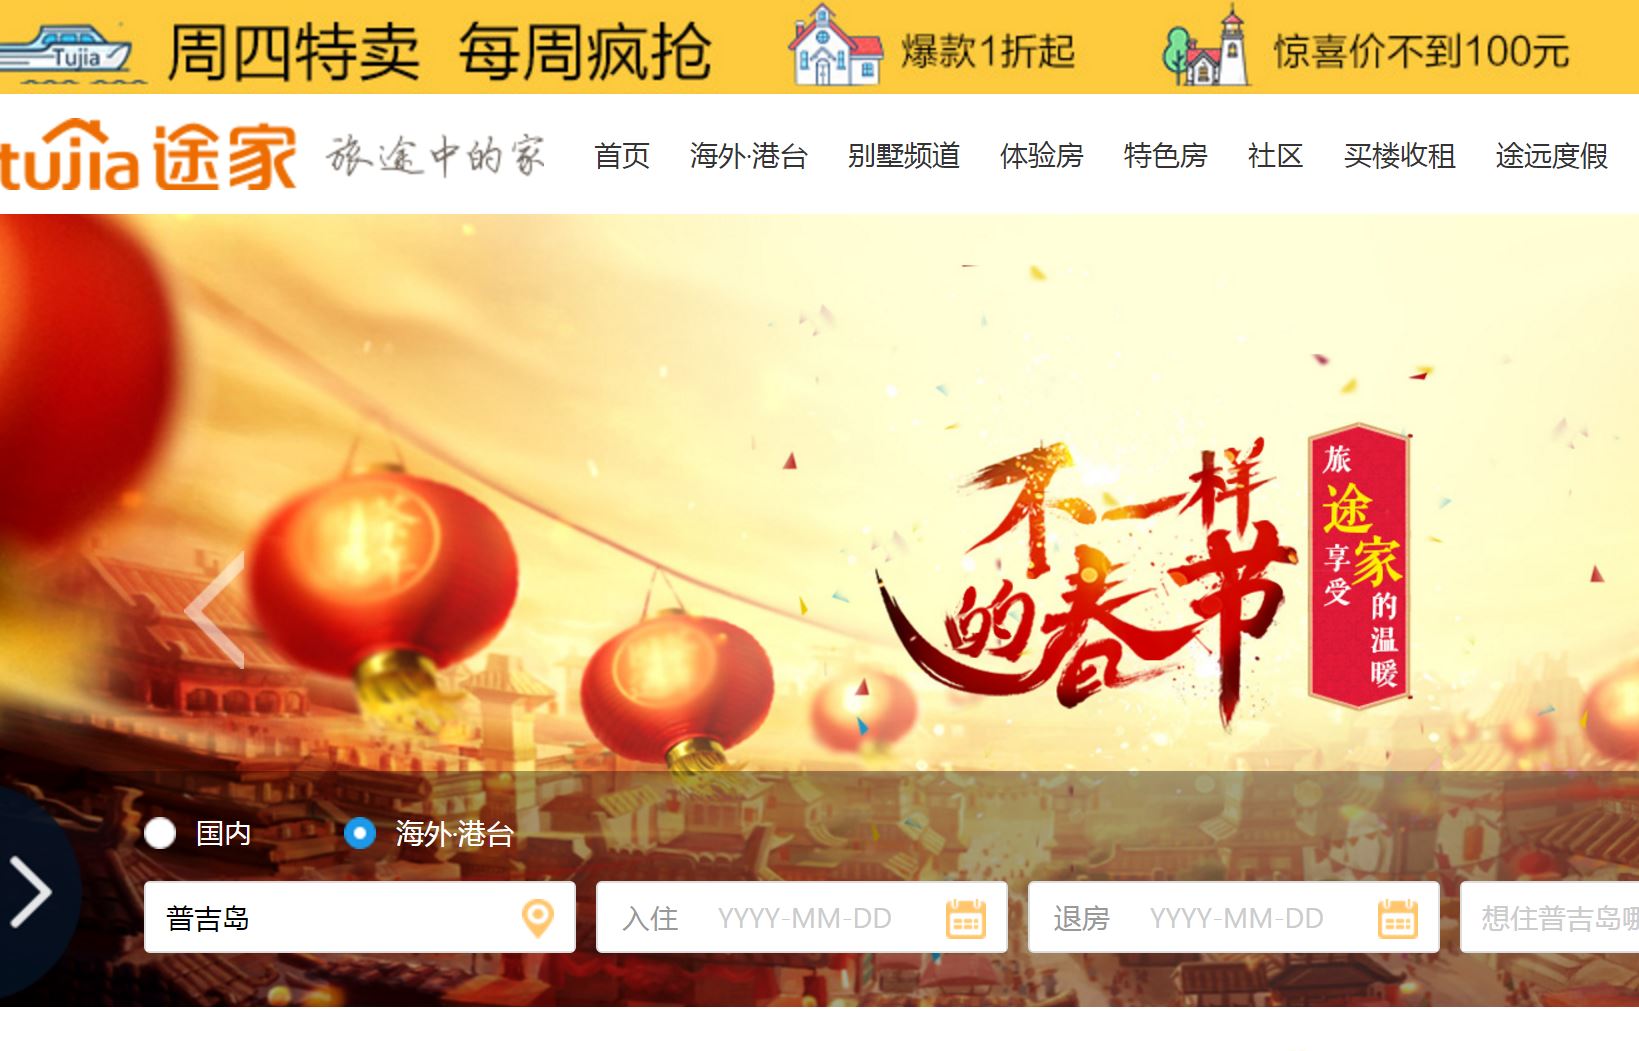 Chinese vacation rental platform tujia begins in earnest its service in Japan for Chinese travelers